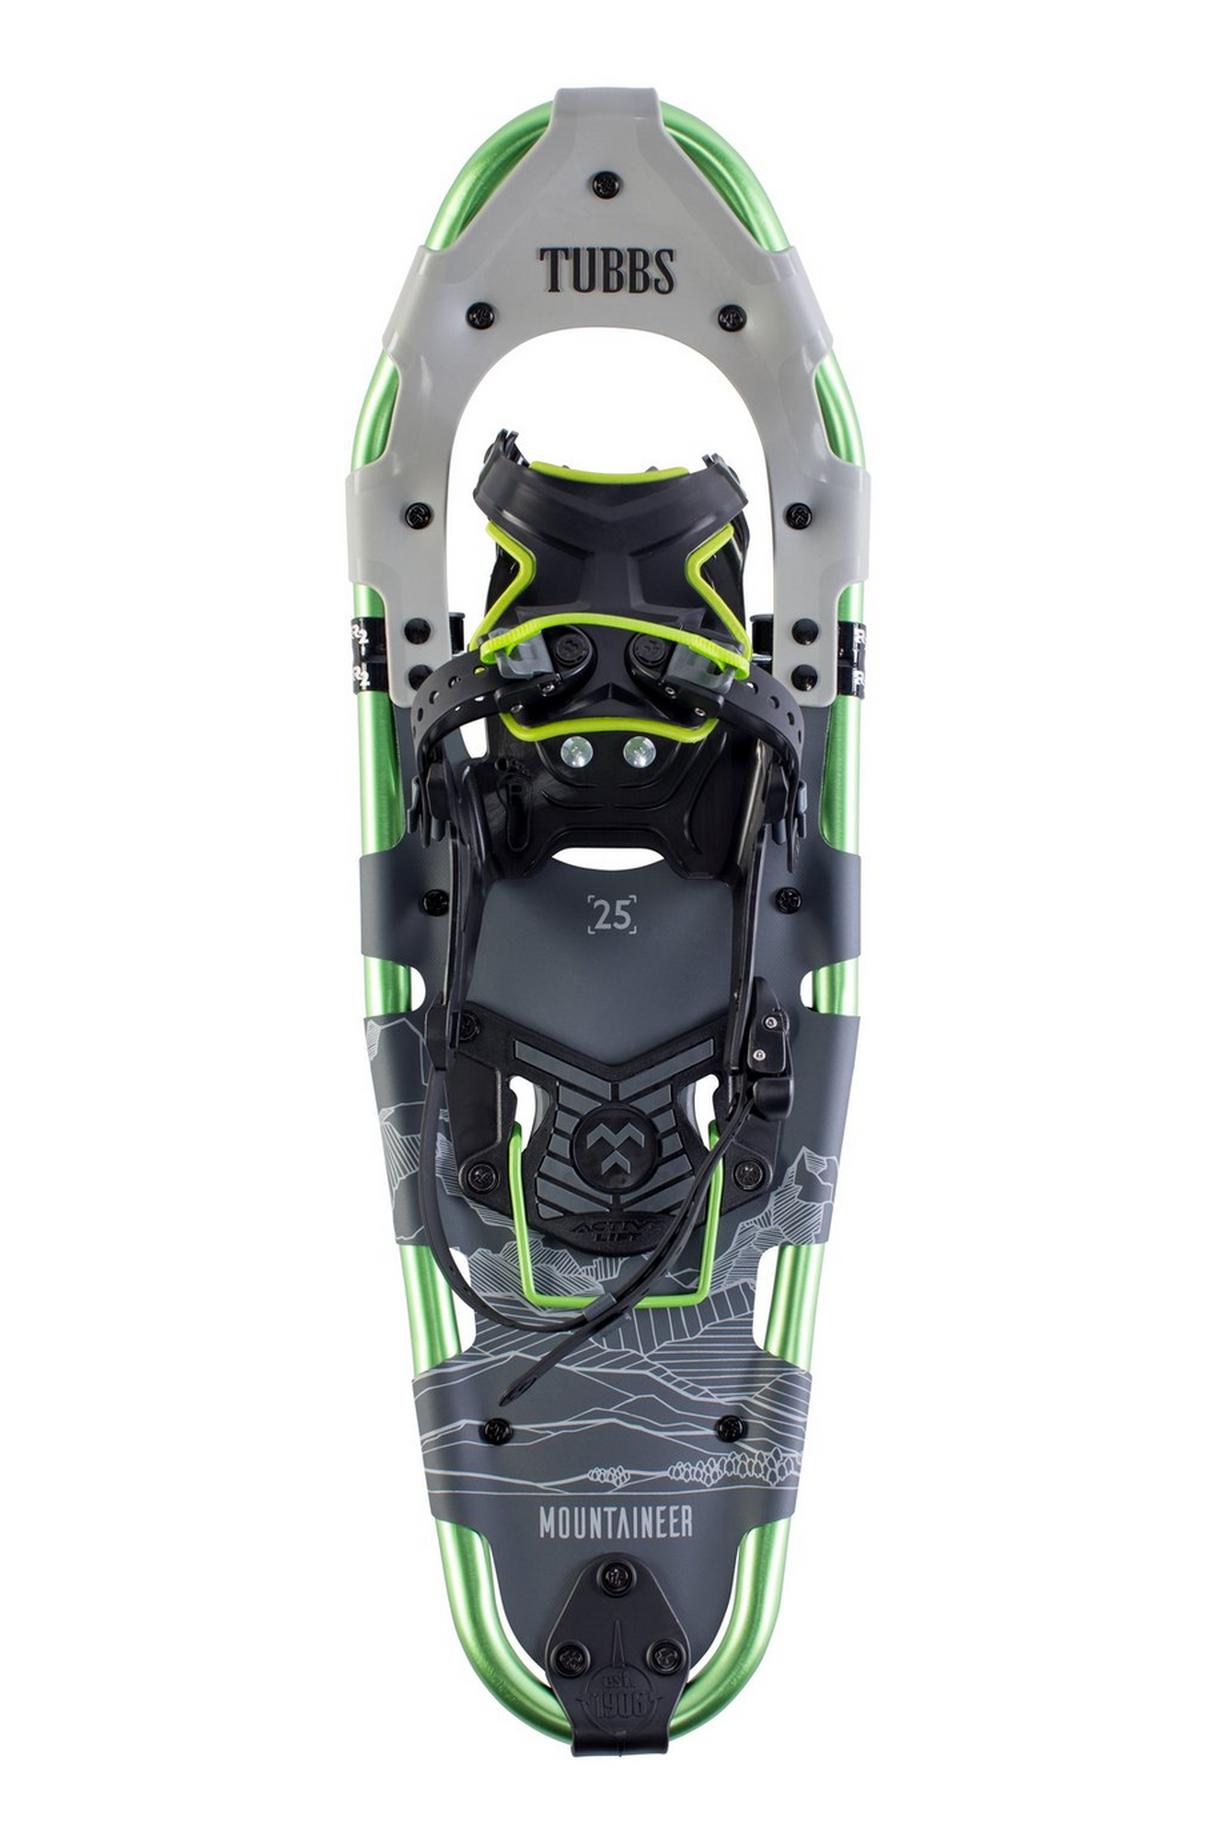 Tubbs Mountaineer Snowshoes 25"